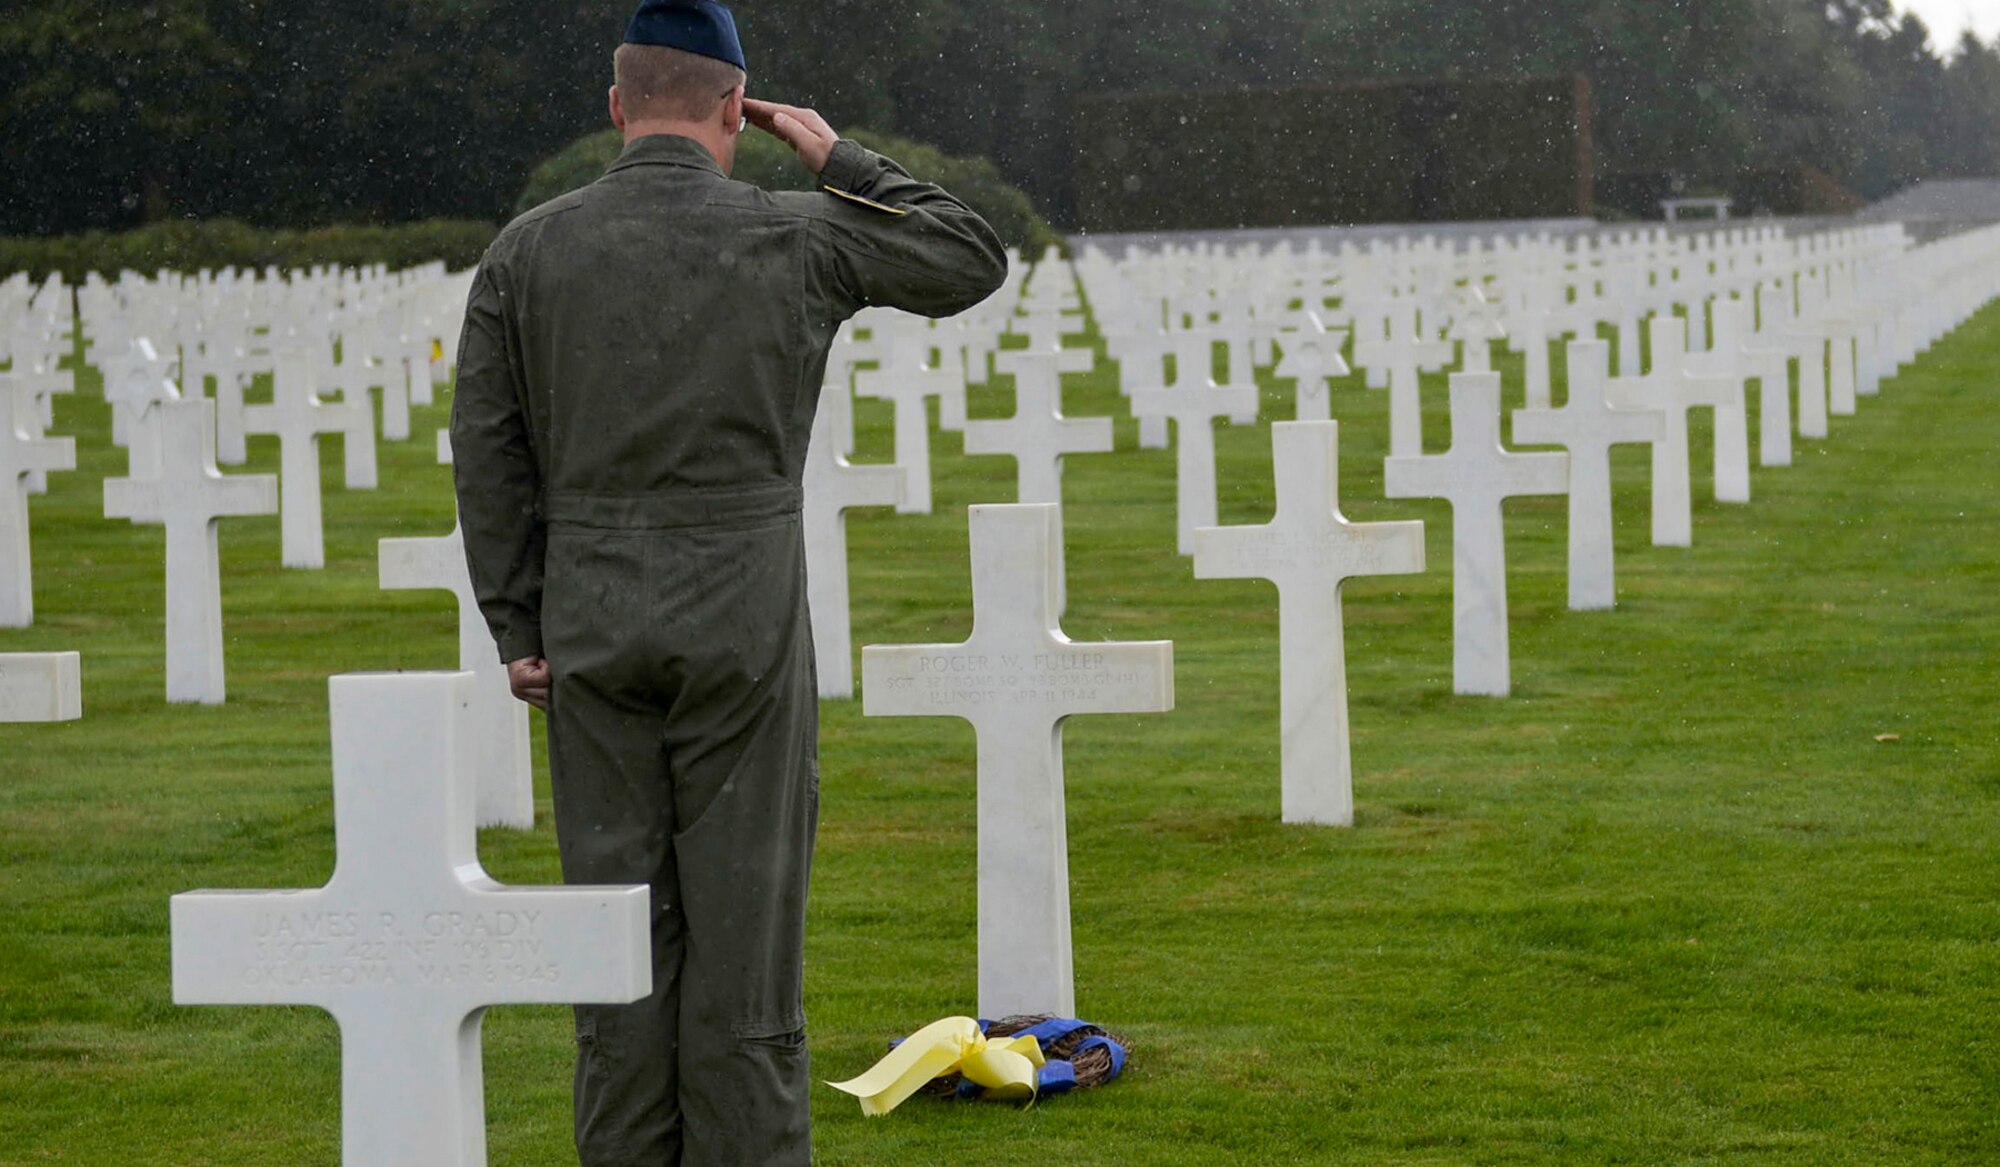 U.S. Air Force Reserve Master Sgt. Scott Klobucher, a loadmaster assigned to the 327th Airlift Squadron, 913th Airlift Group, places the final wreath of the day at Ardennes American Military Cemetery in Neupre, Belgium, Sept. 12, 2017. Klobucher placed the wreath on the grave of Staff Sgt. Roger W. Fuller, 327th Bomb Squadron, 92 Bomb Group, Illinois, who died April 11, 1944. (U.S. Air Force photo by Airman 1st Class Codie Collins)